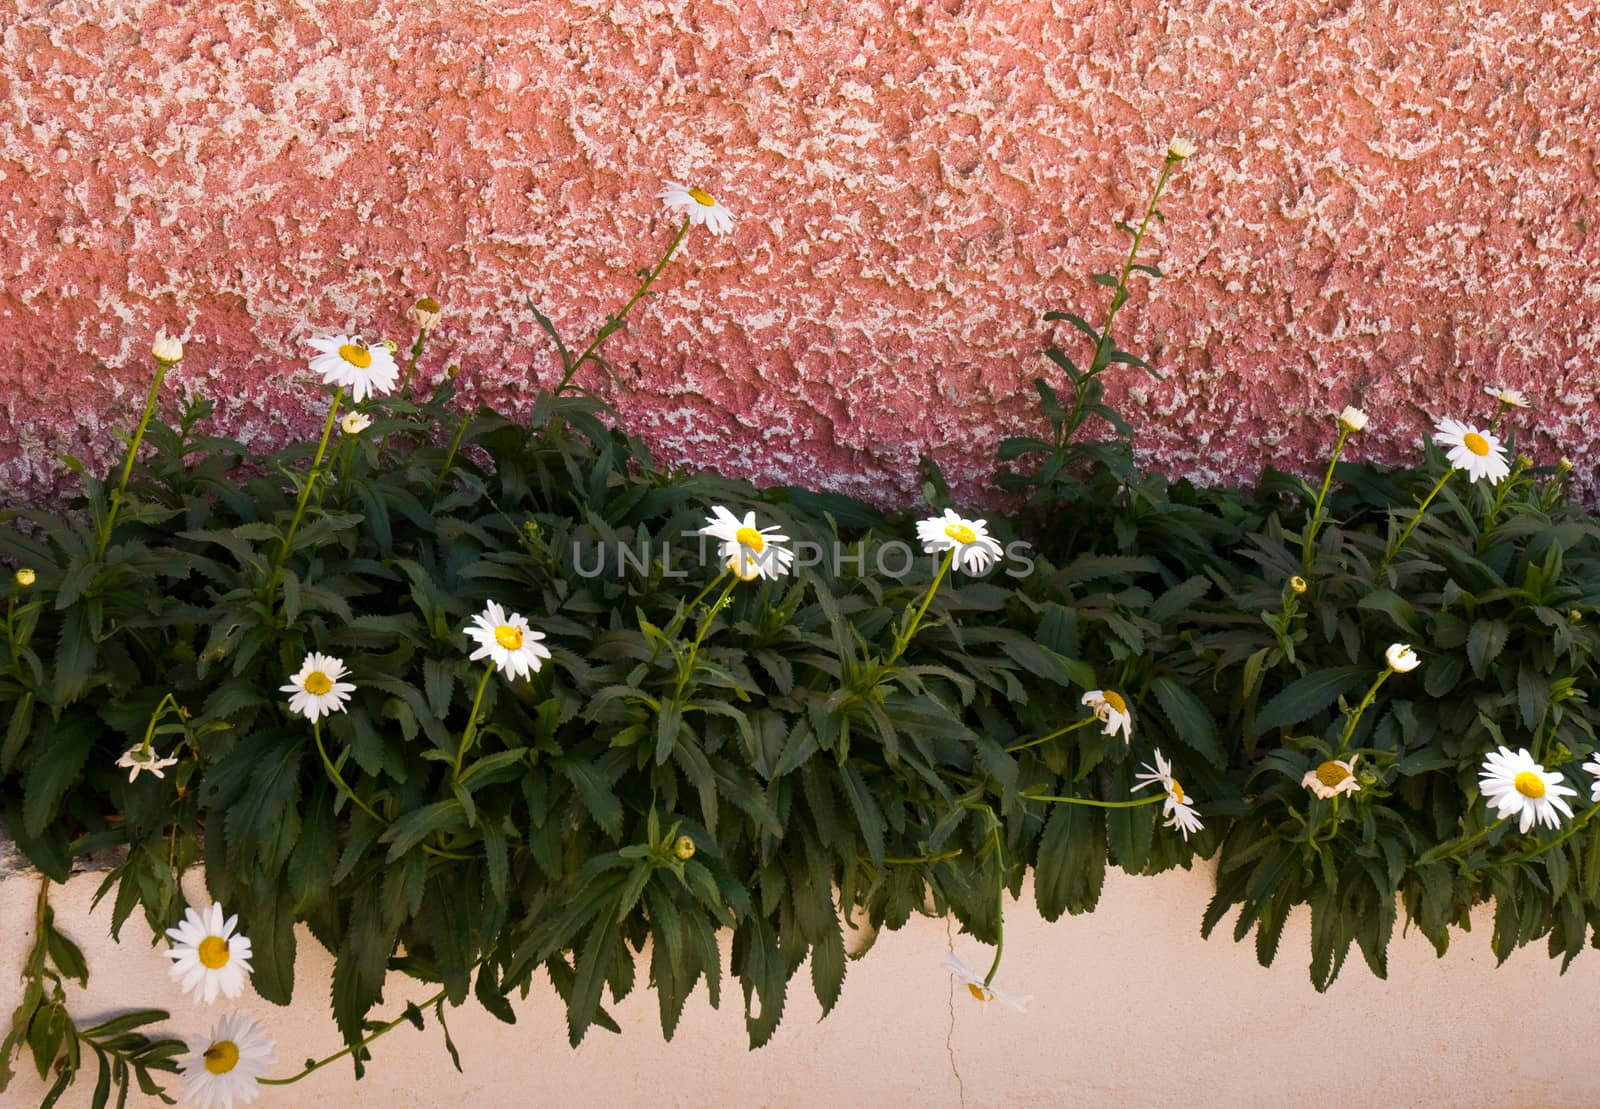 Pot with white daisies on the wall.